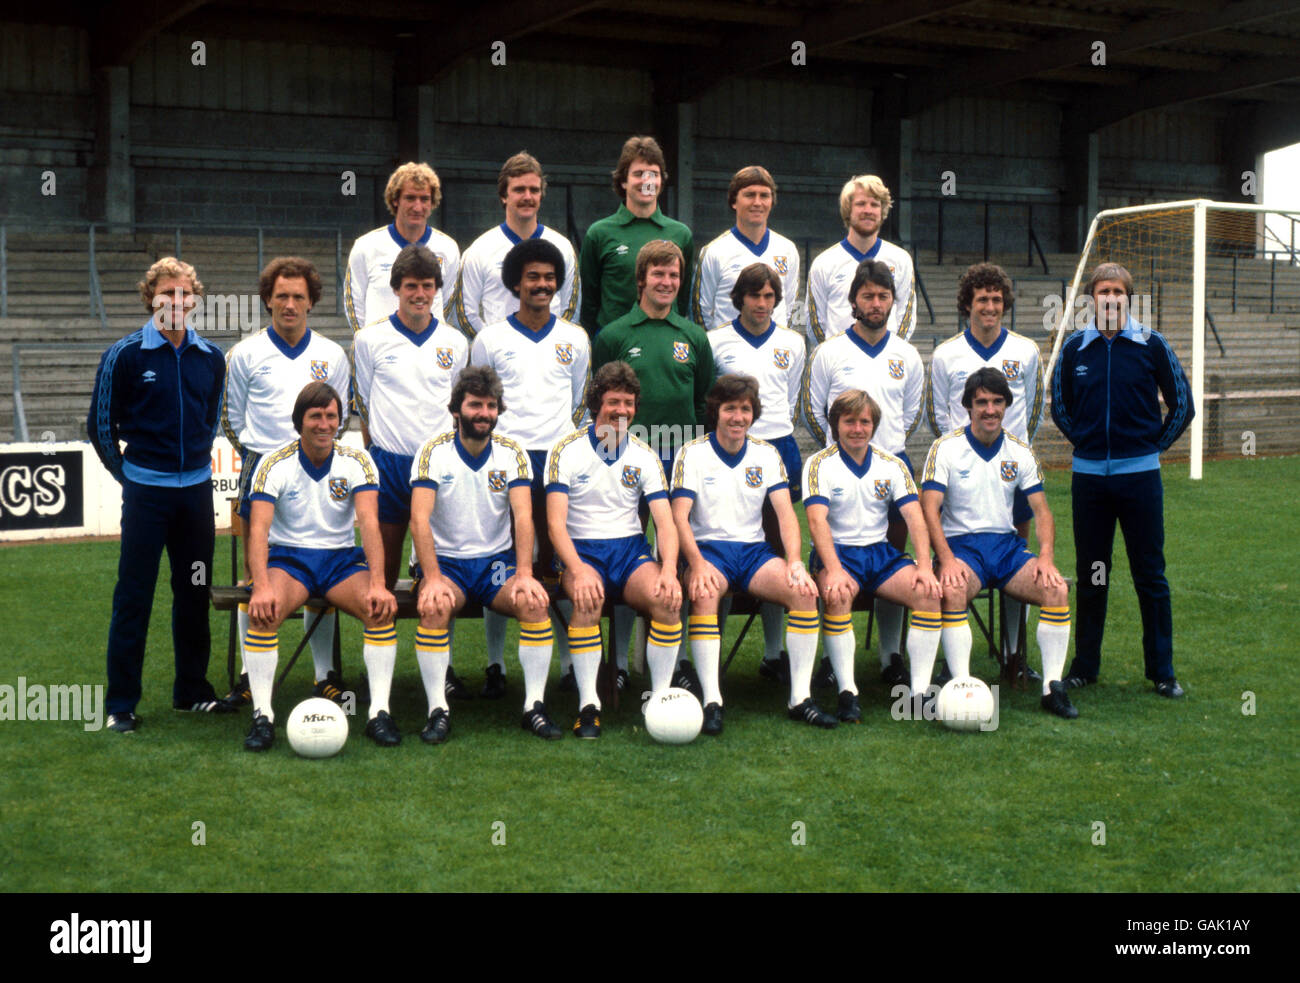 Football - Ligue de football Division 4 - Torquay United Photocall. Torquay United Squad 1982-83 Banque D'Images